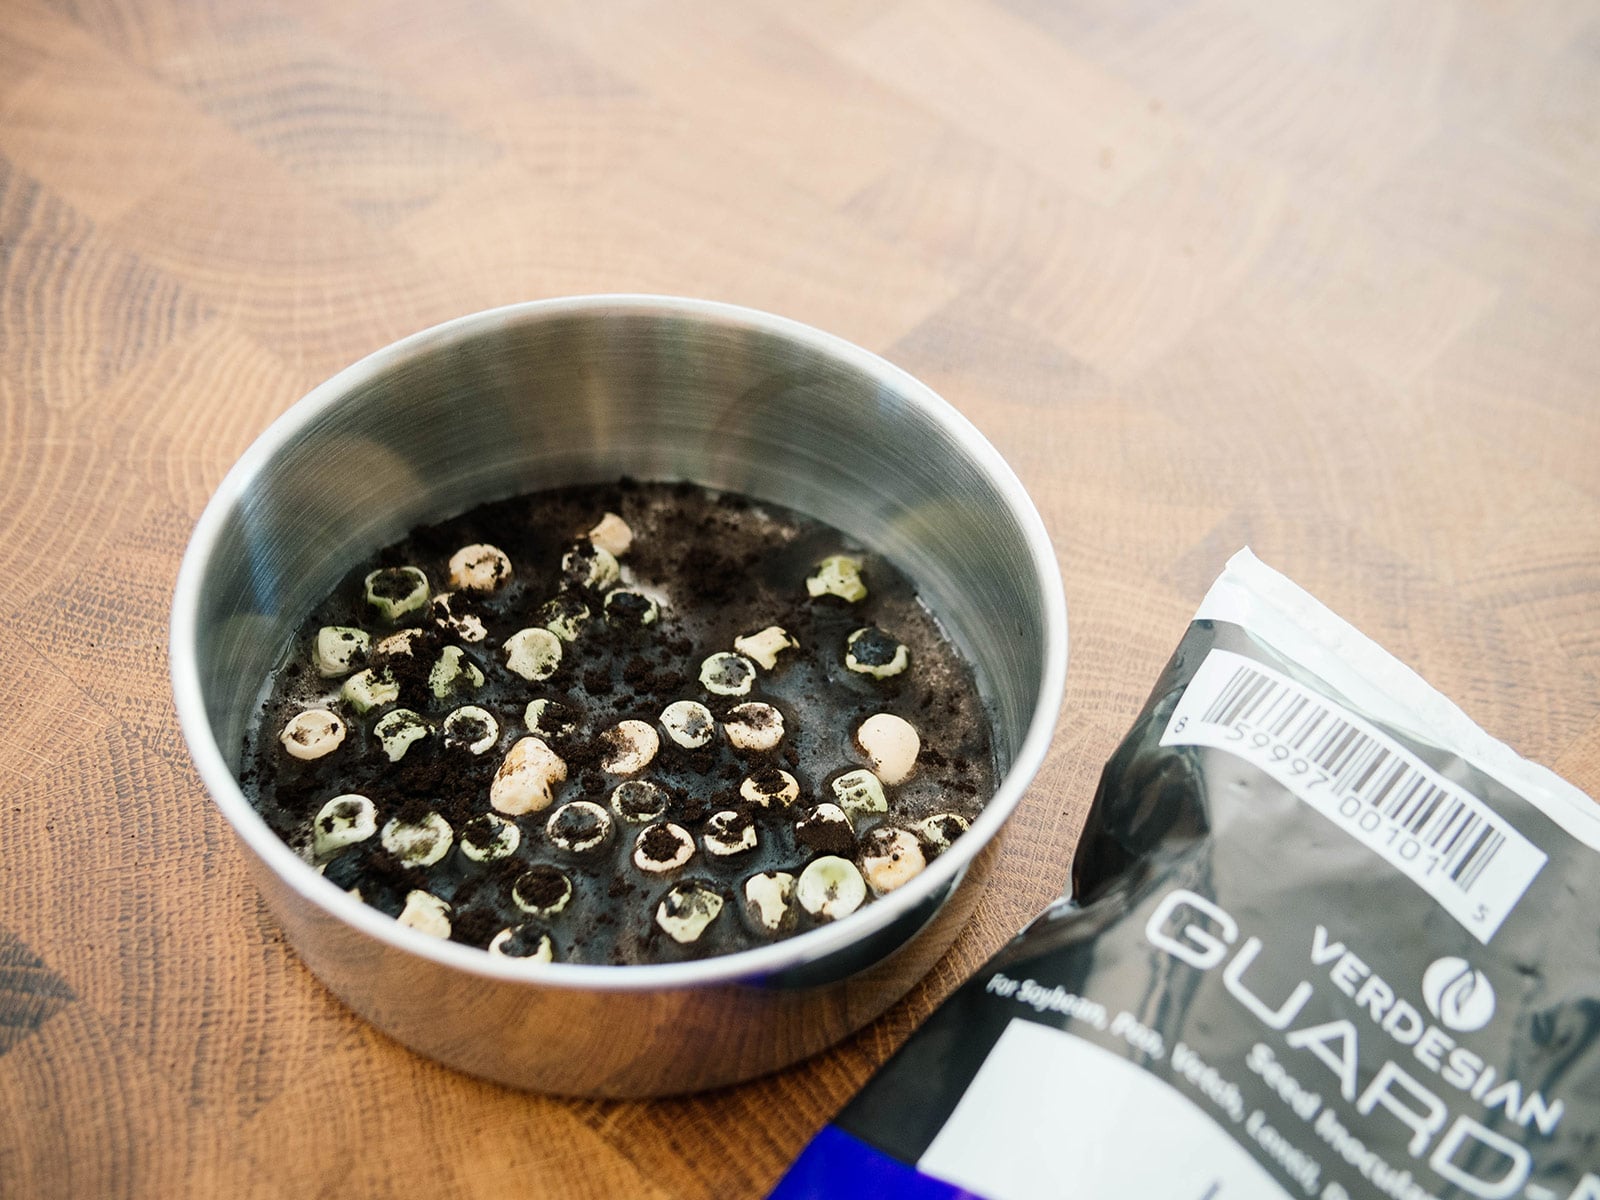 Pea seeds being inoculated in a small silver dish on a wooden counter